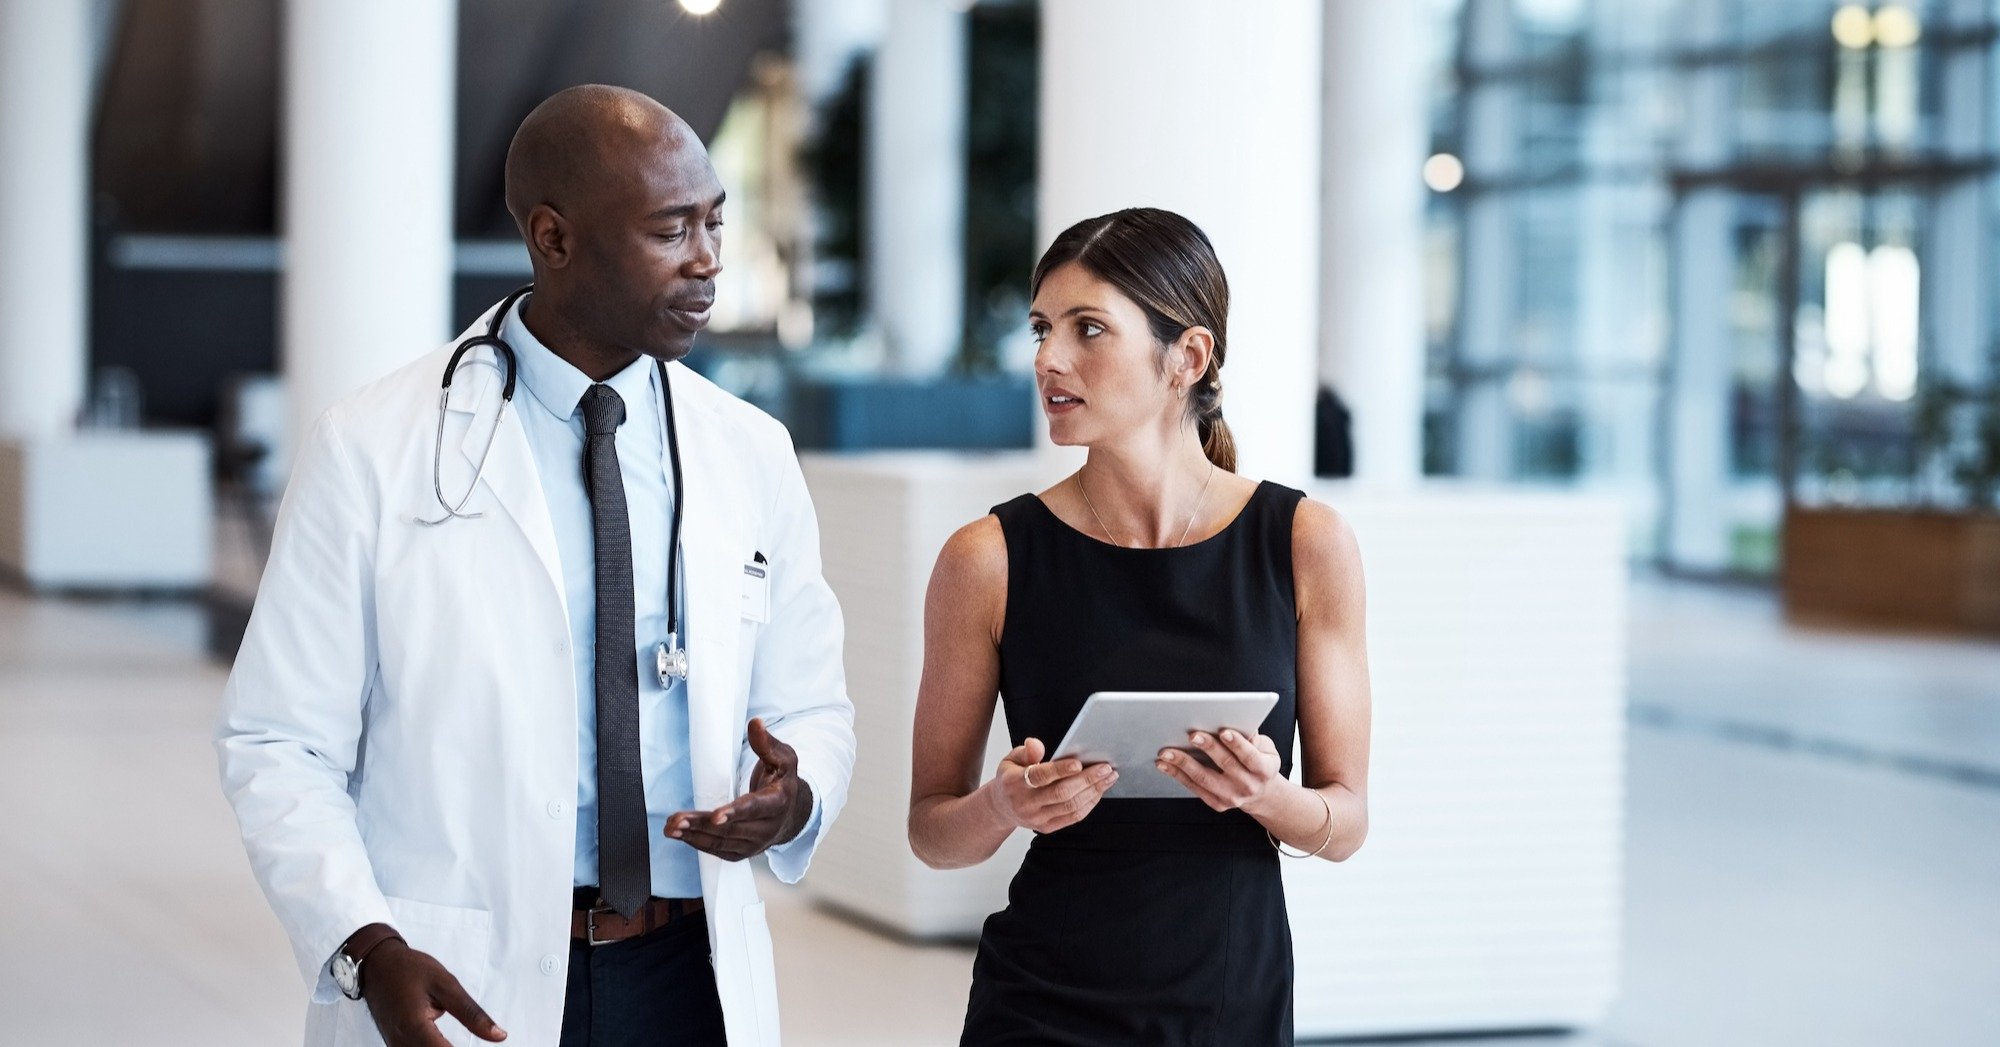 Physician consults with hospital administrator